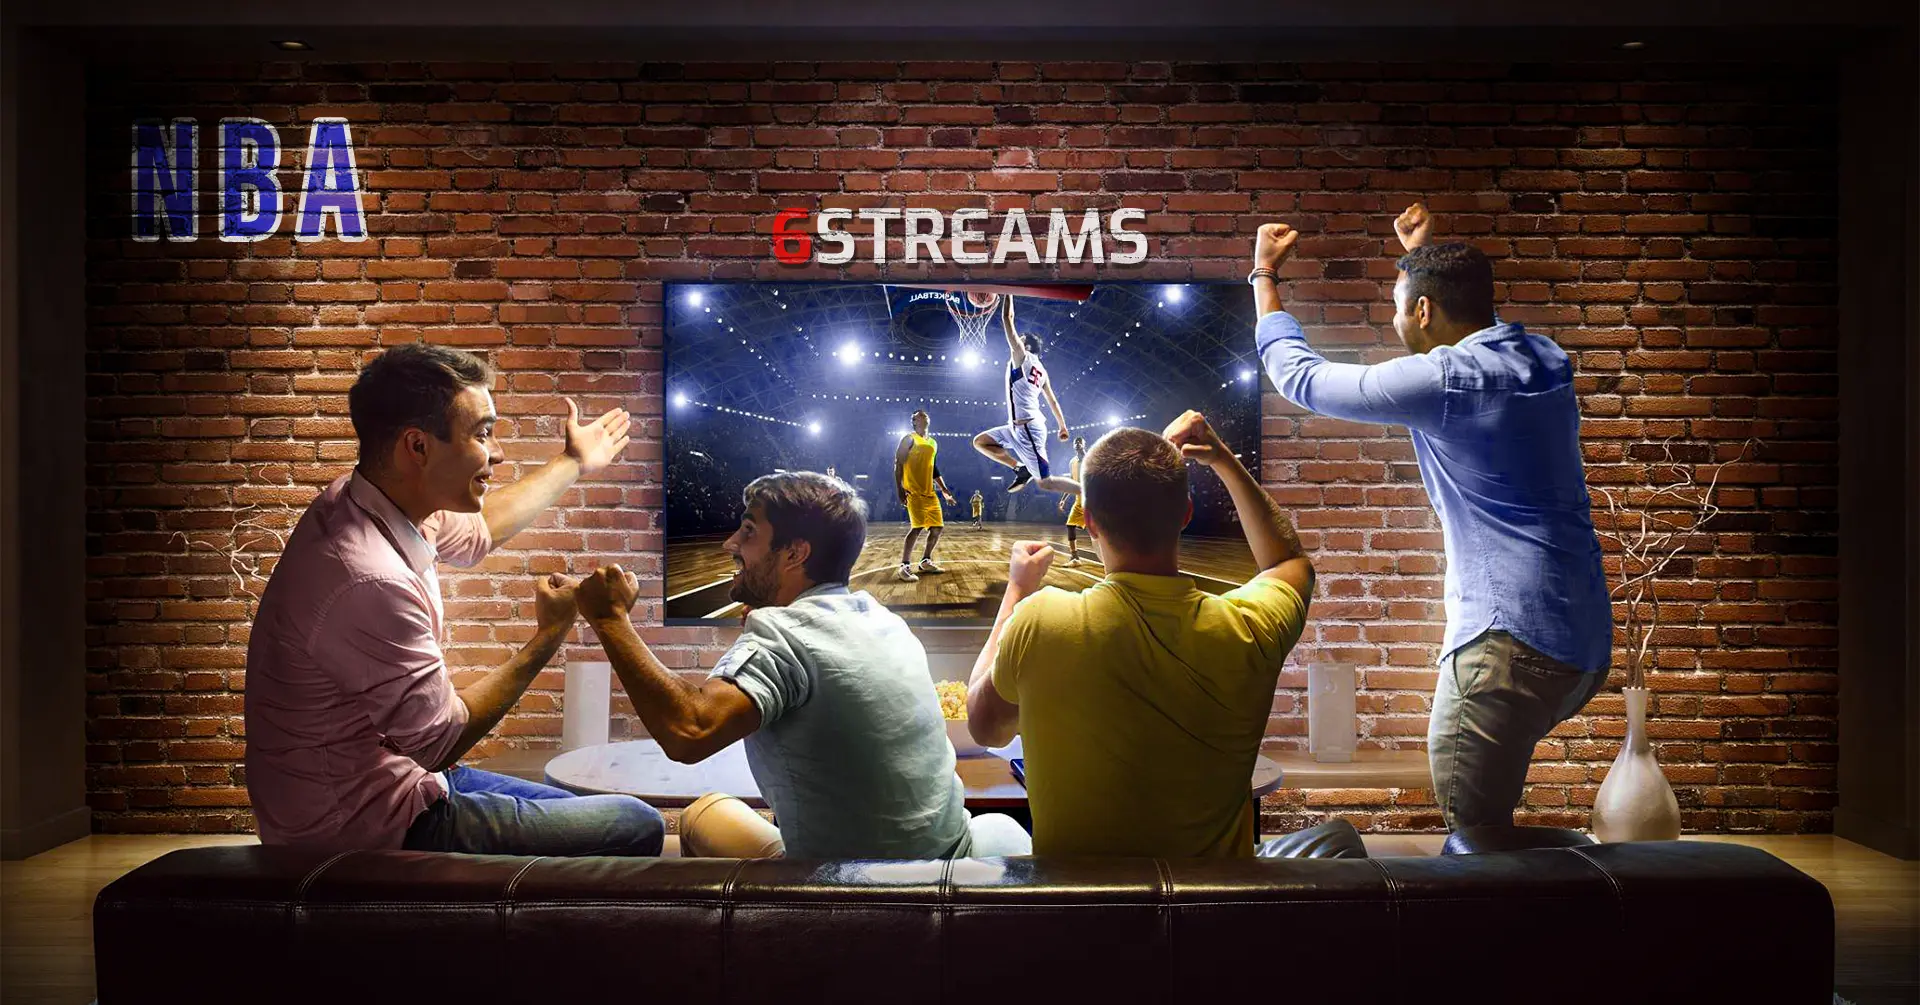 6streams Explore the Ultimate Sports Streaming Experience